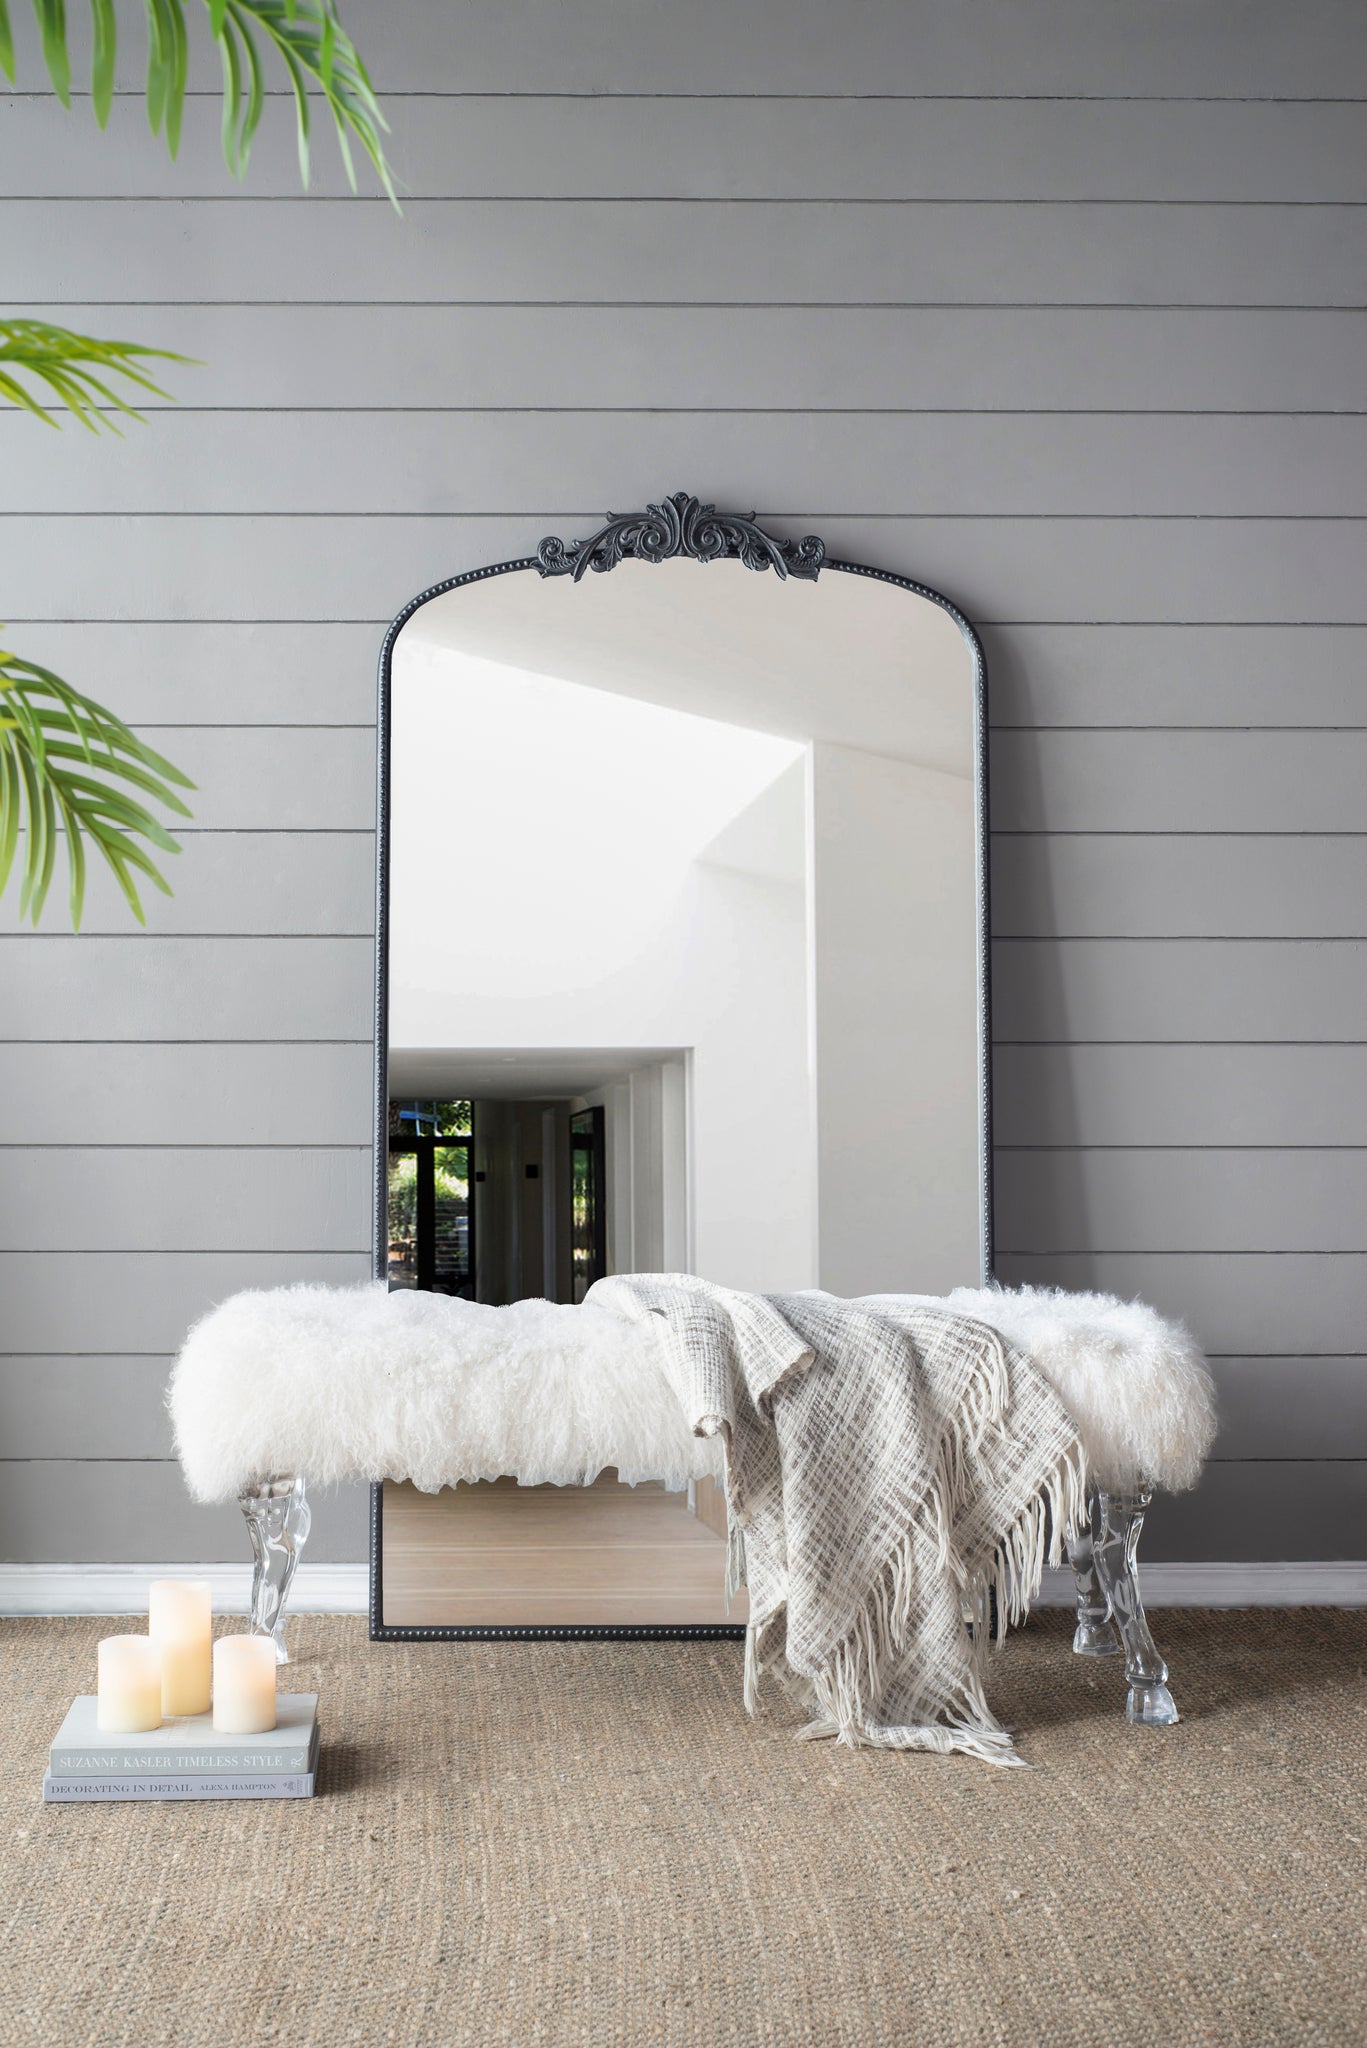 66" x 36" Full Length Mirror, Arched Mirror Hanging or black-mdf+glass